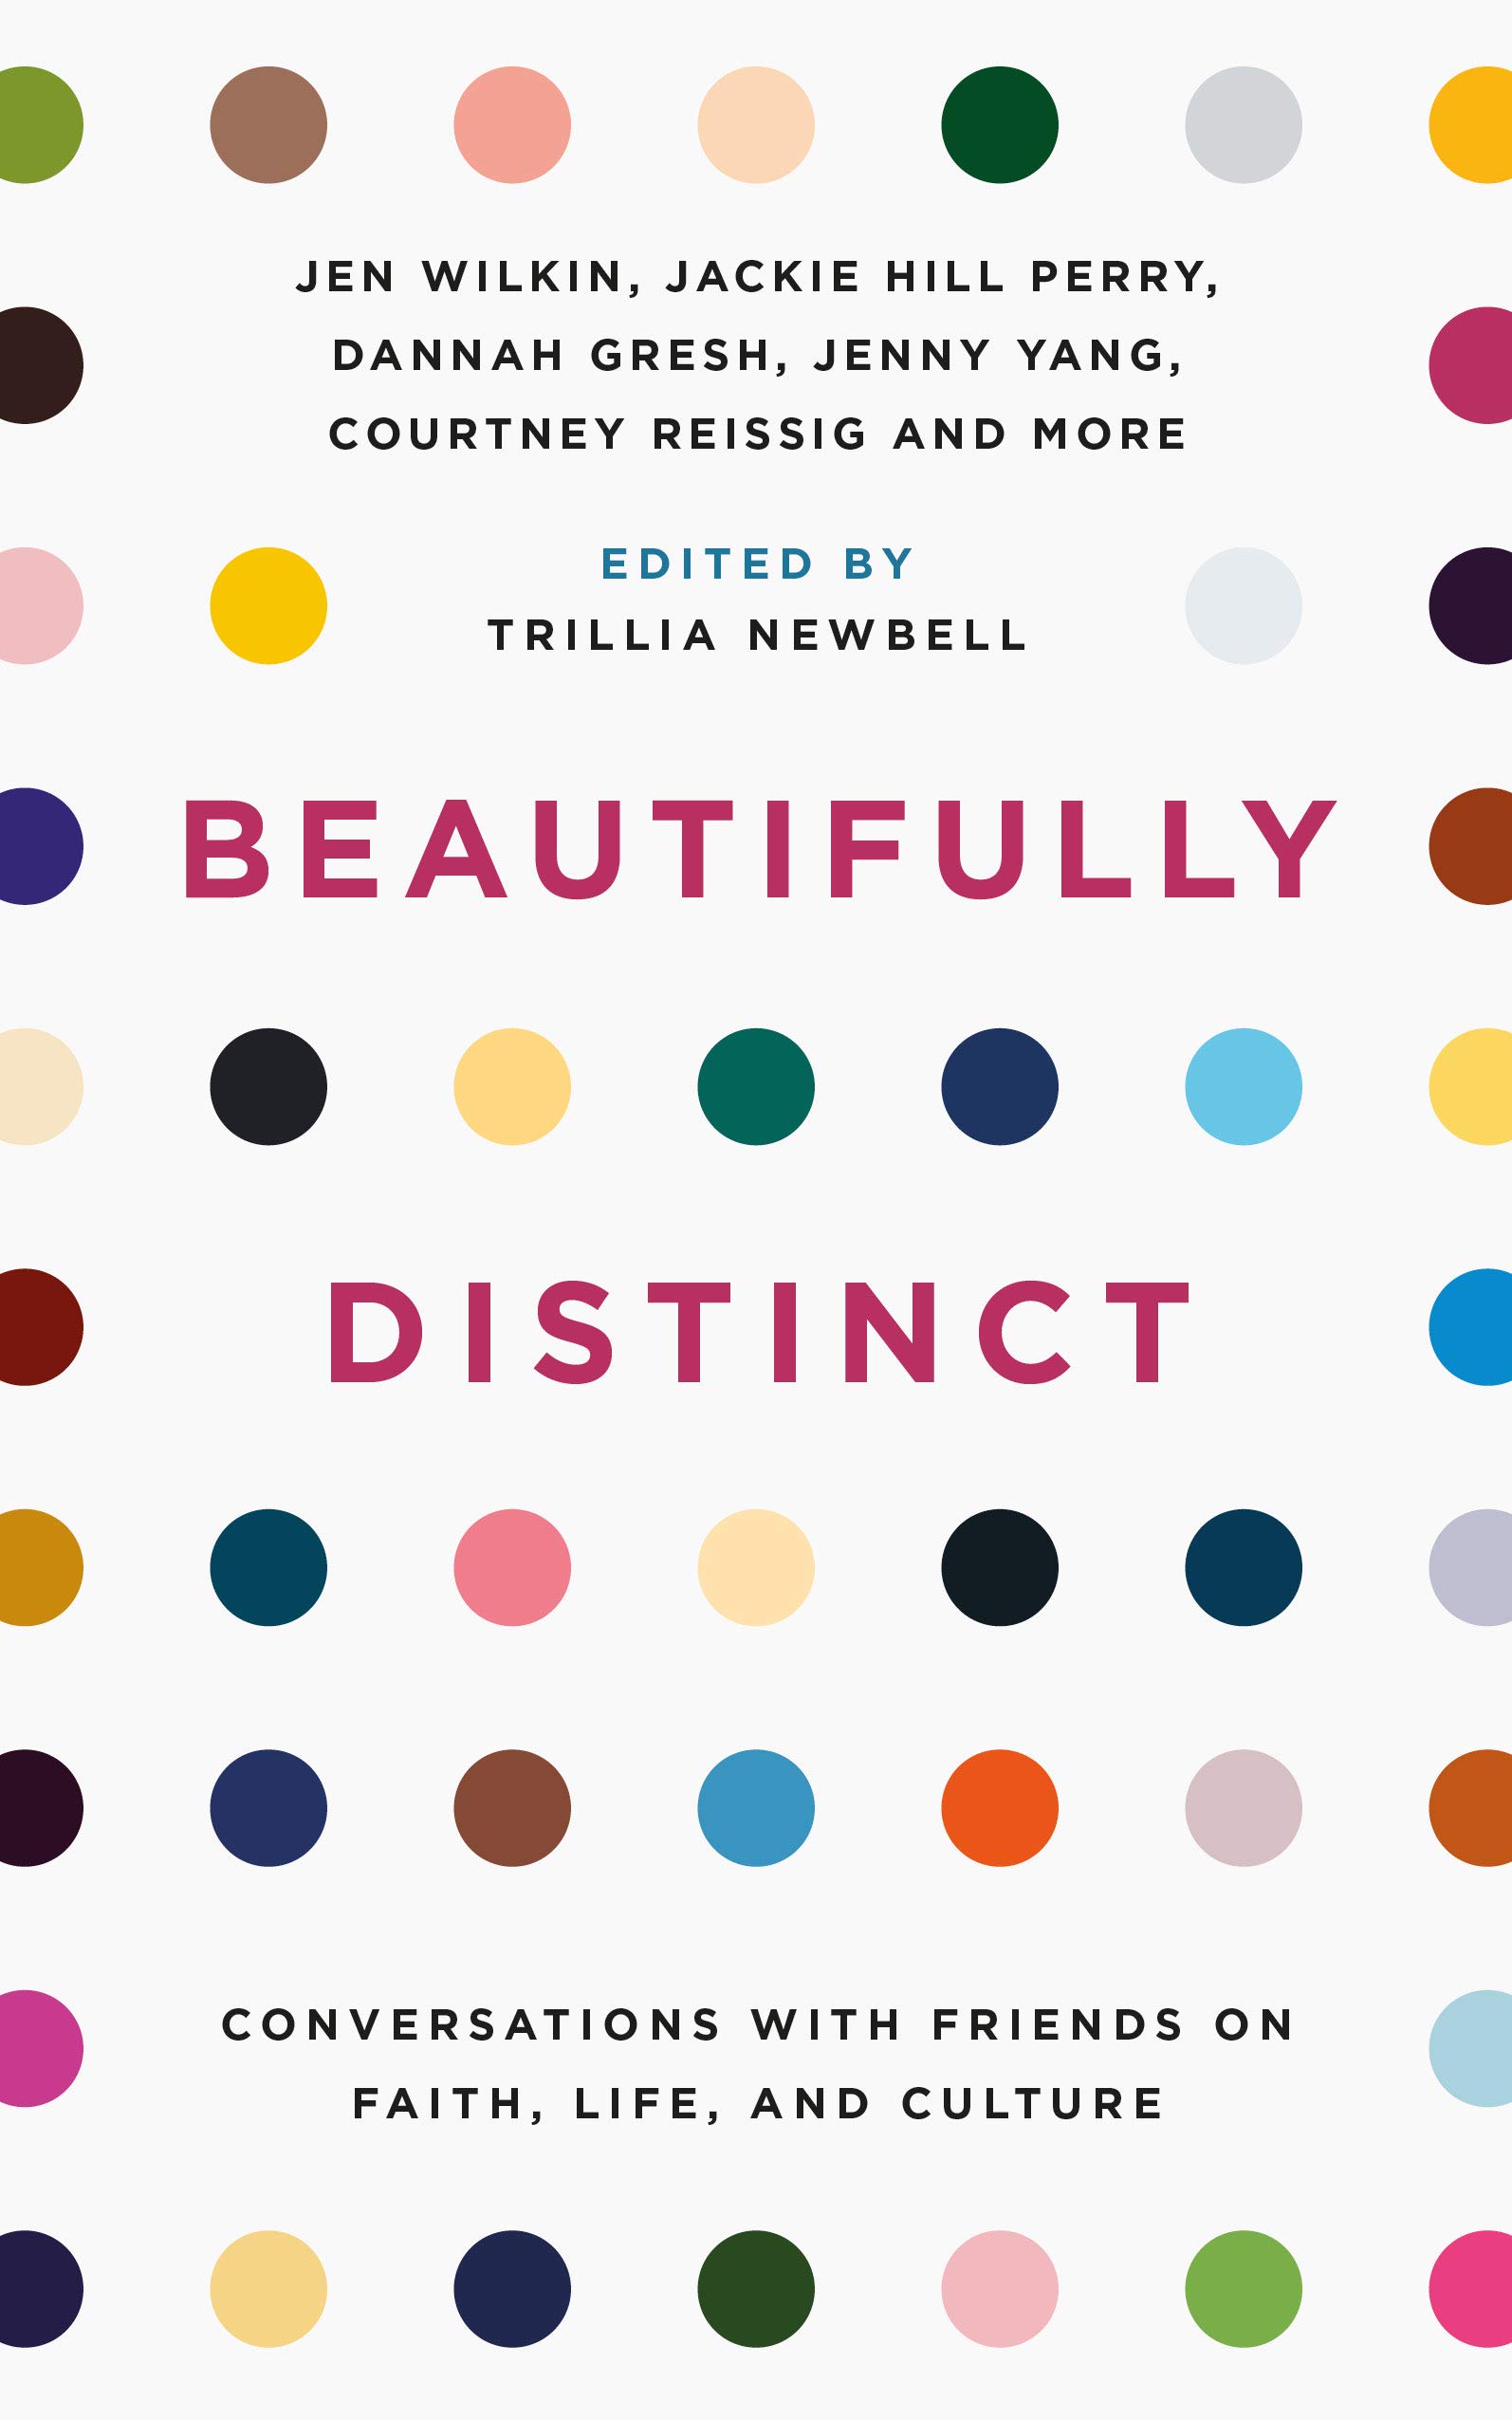 Beautifully Distinct: Conversations with Friends on Faith, Life, and Culture (Christian book on food, body image, beauty, social media, work, racism, books, movies, culture)